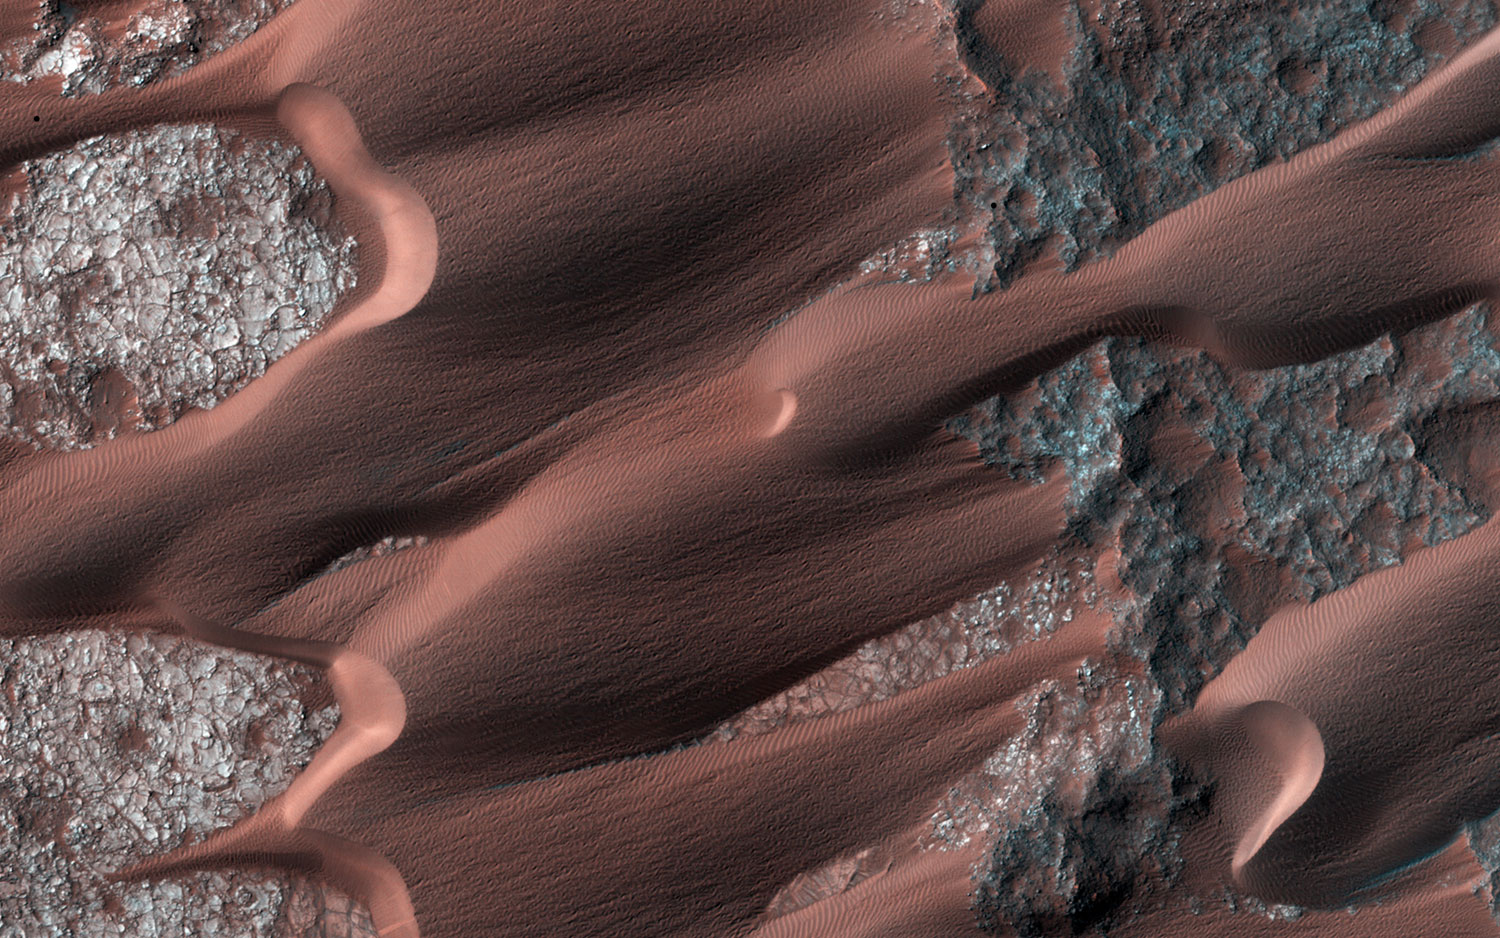 Nili Patera is one of the most active dune fields on Mars and is continuously monitored by NASA's Mars Reconnaissance Orbiter, with a new image acquired about every six weeks. This most recent one was recorded in March and released on April 30, 2014.